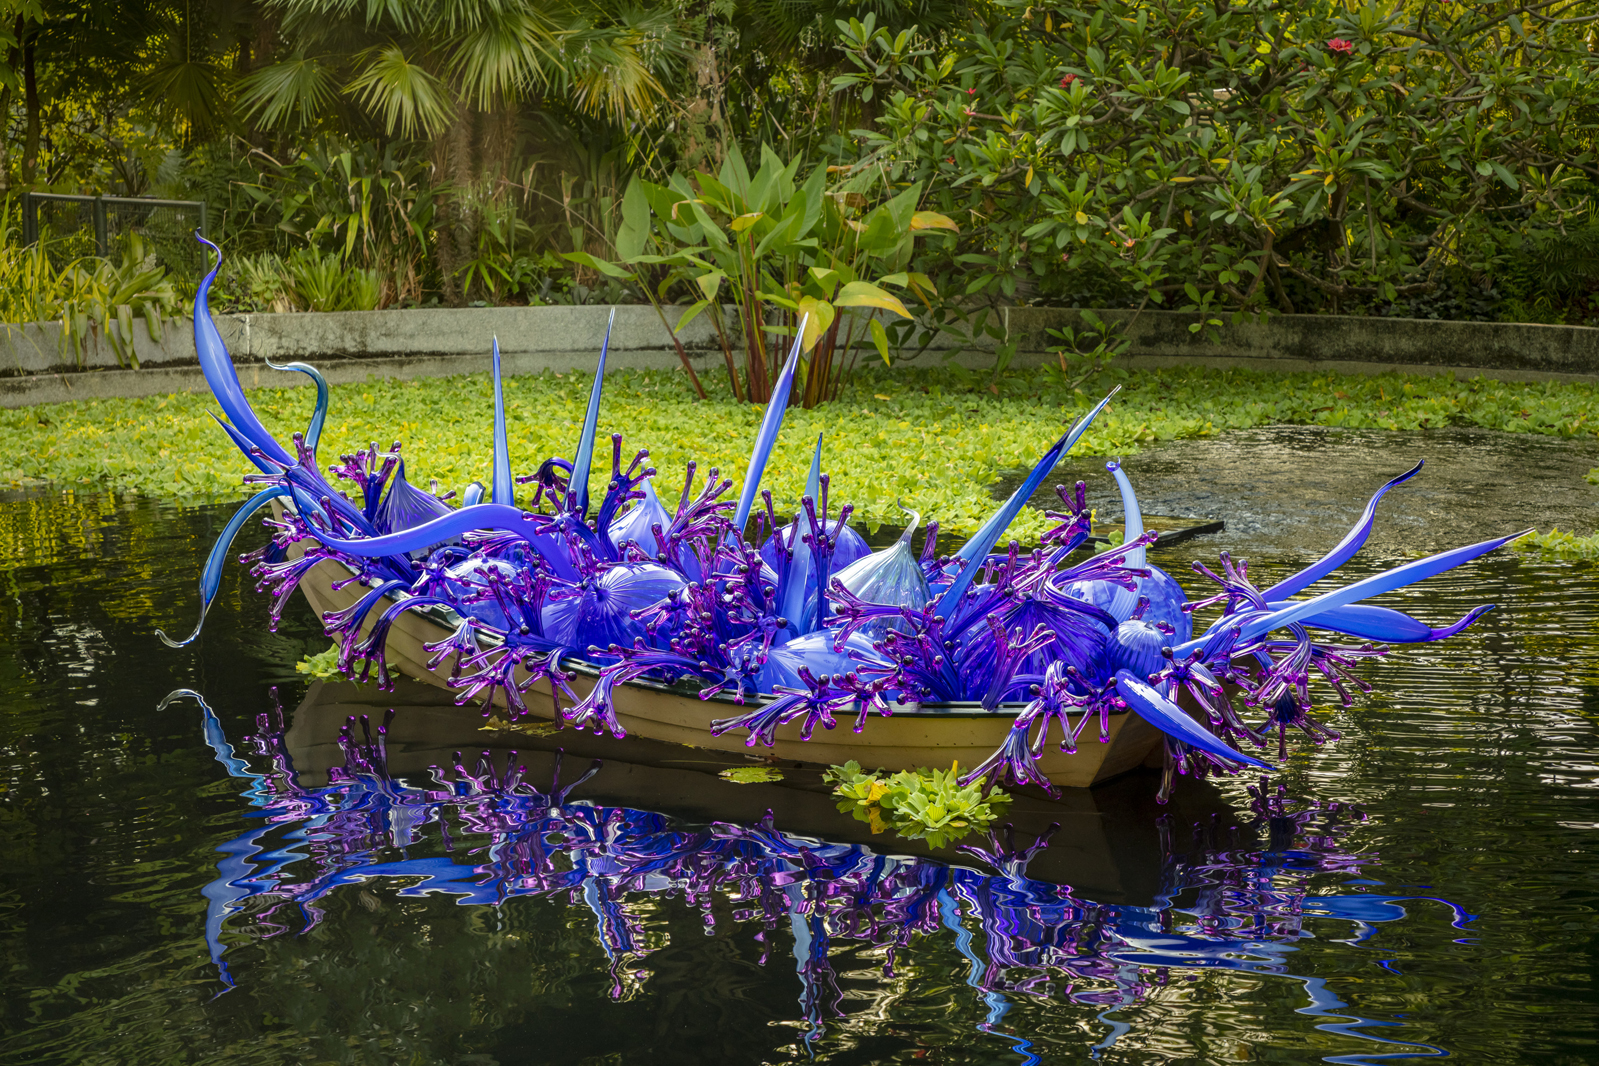 Blue and Purple Boat, 2006 by Dale Chihuly